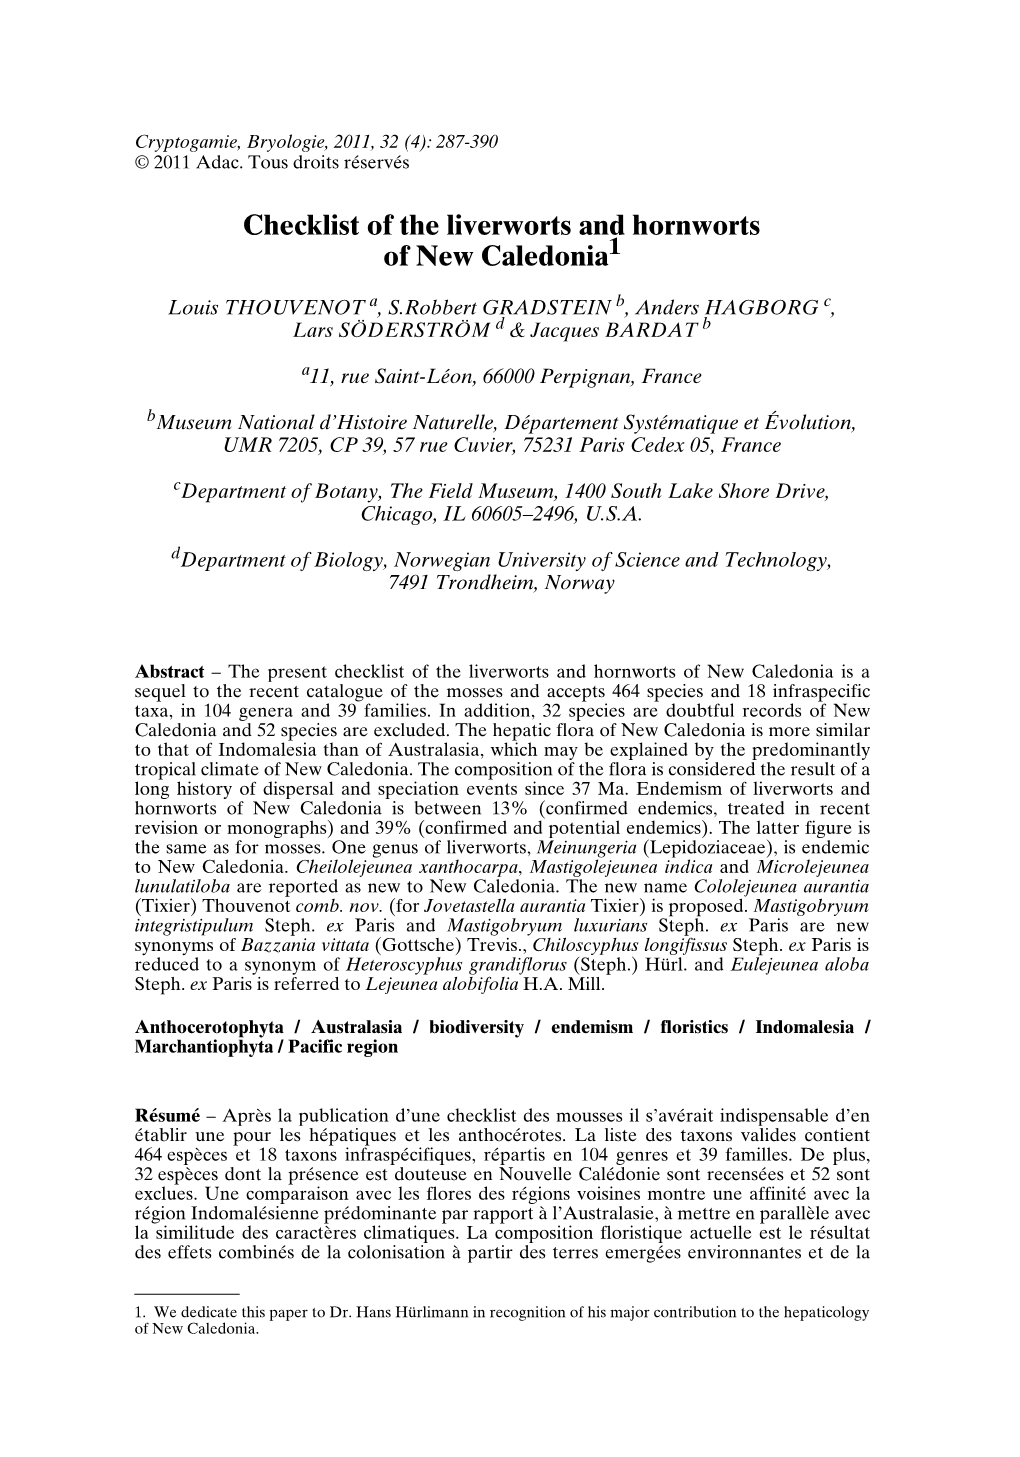 Checklist of the Liverworts and Hornworts of New Caledonia1